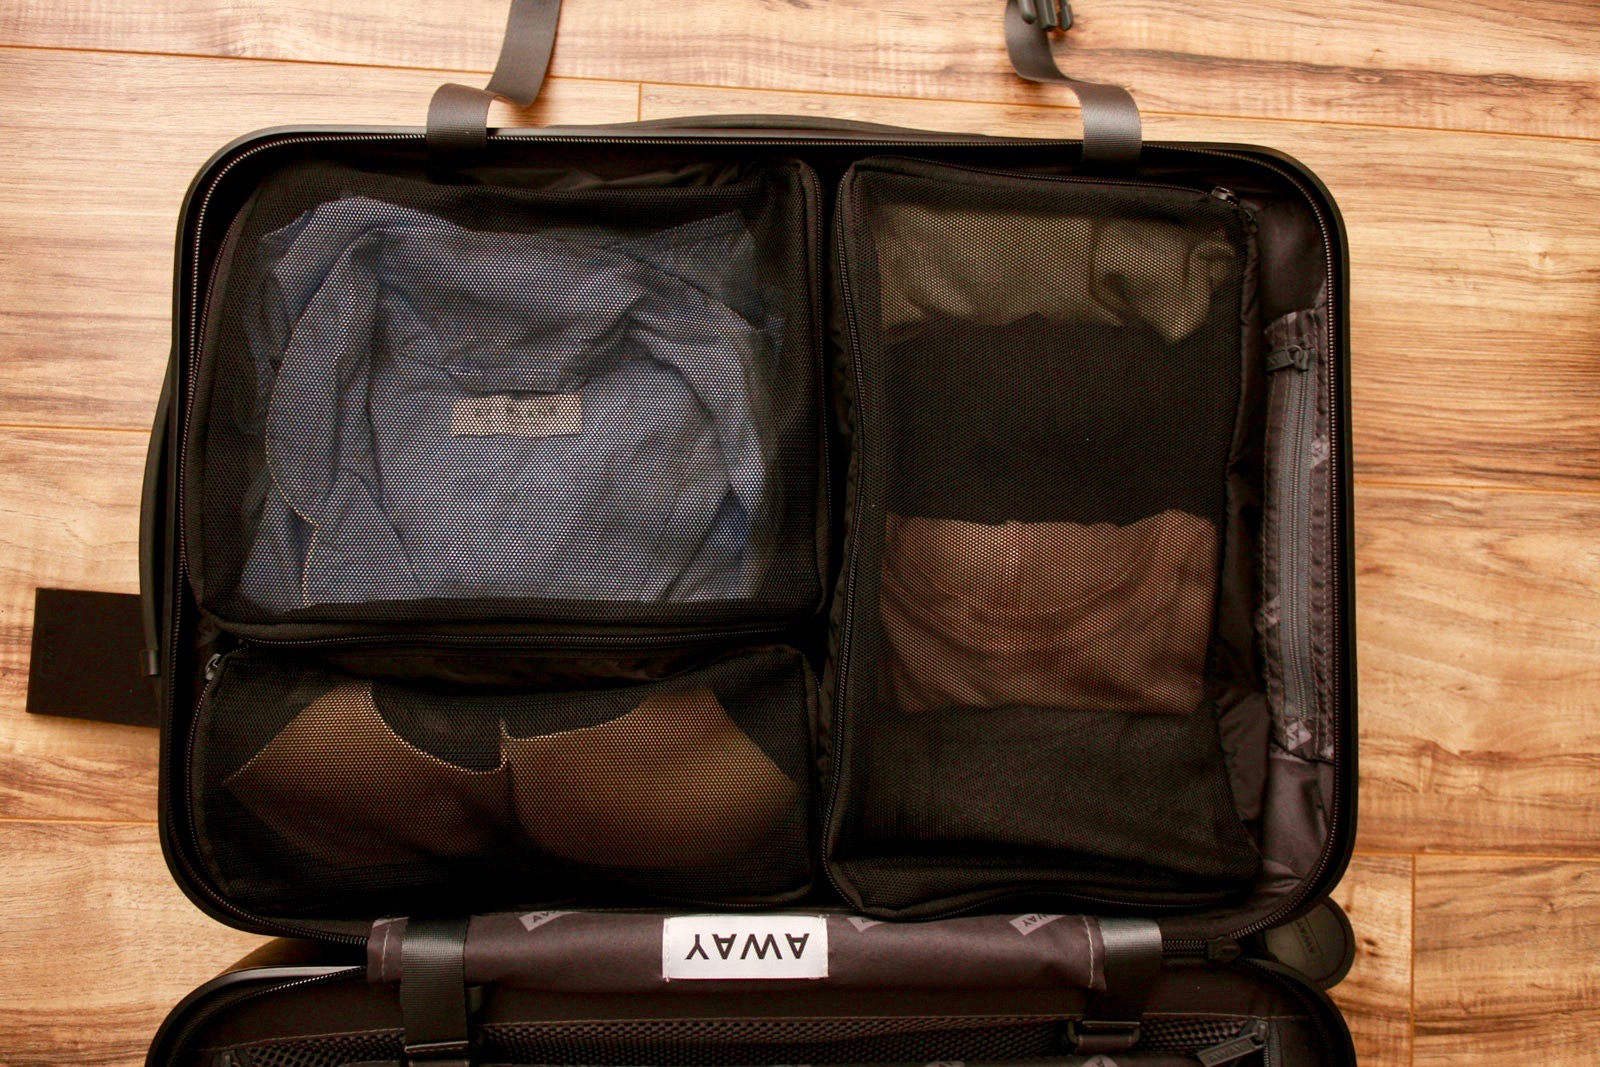 Three Packing Cubes inside an Away suitcase